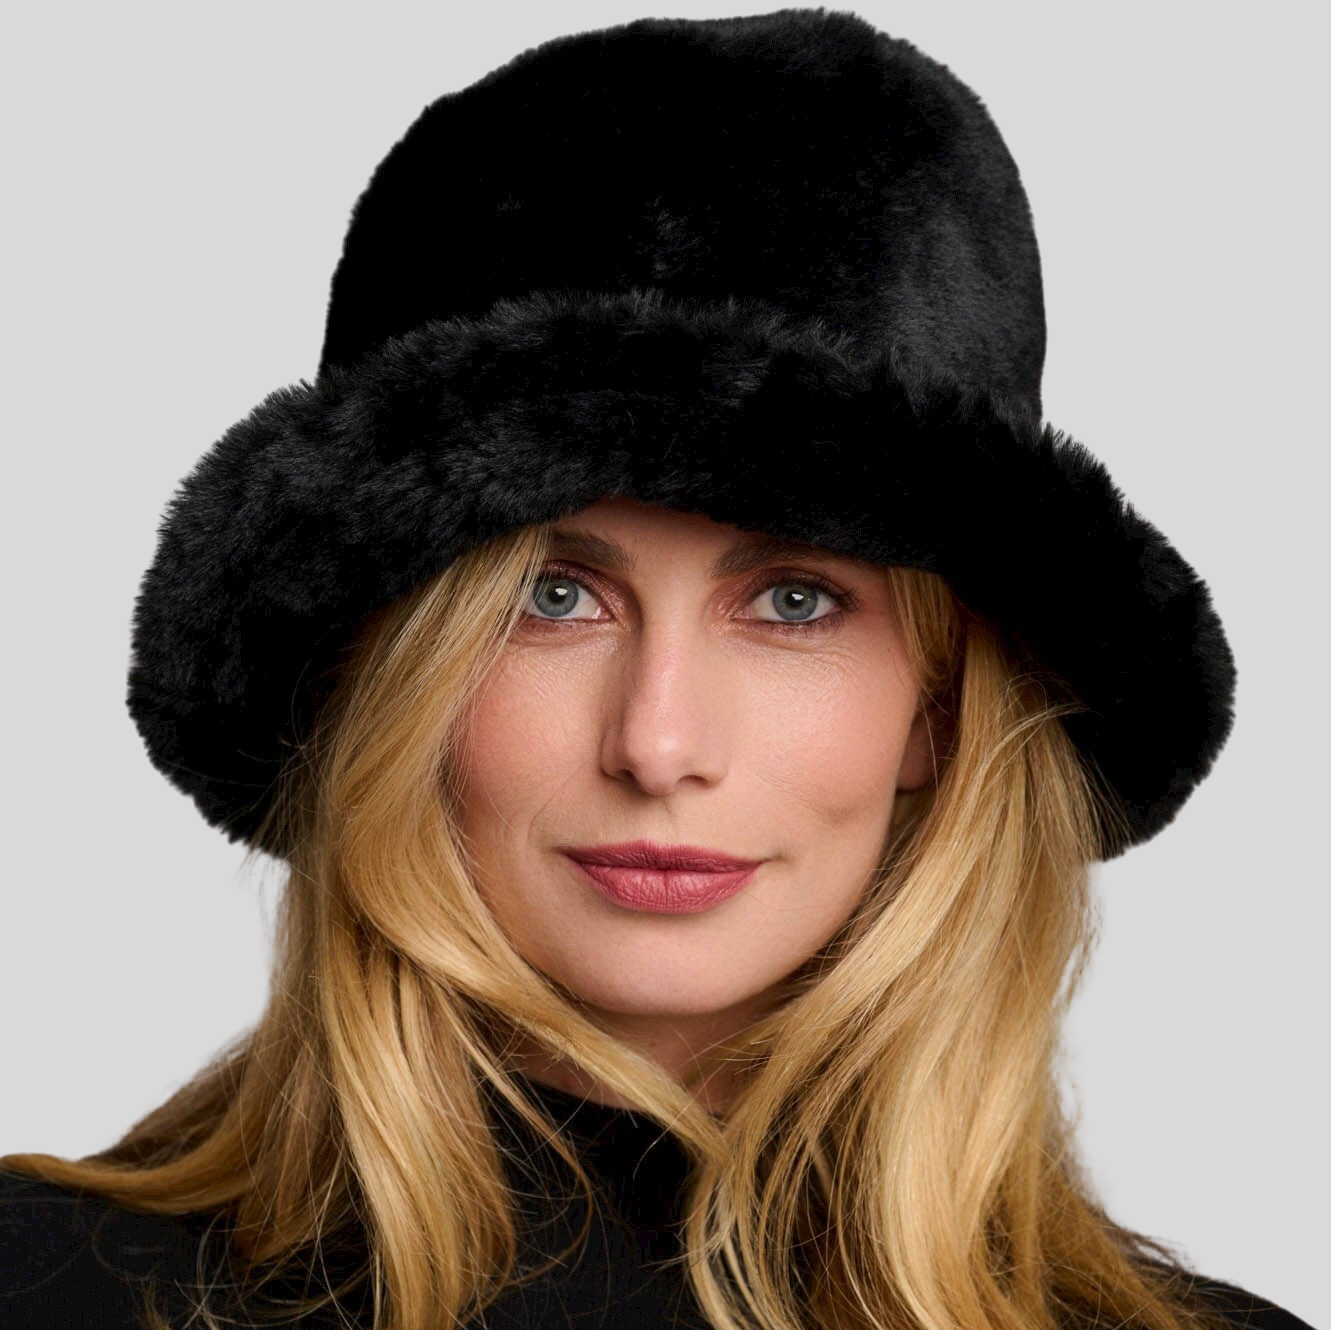 Gotstyle Fashion - Rino and Pelle Hats Faux Fur Bucket Hat - Black